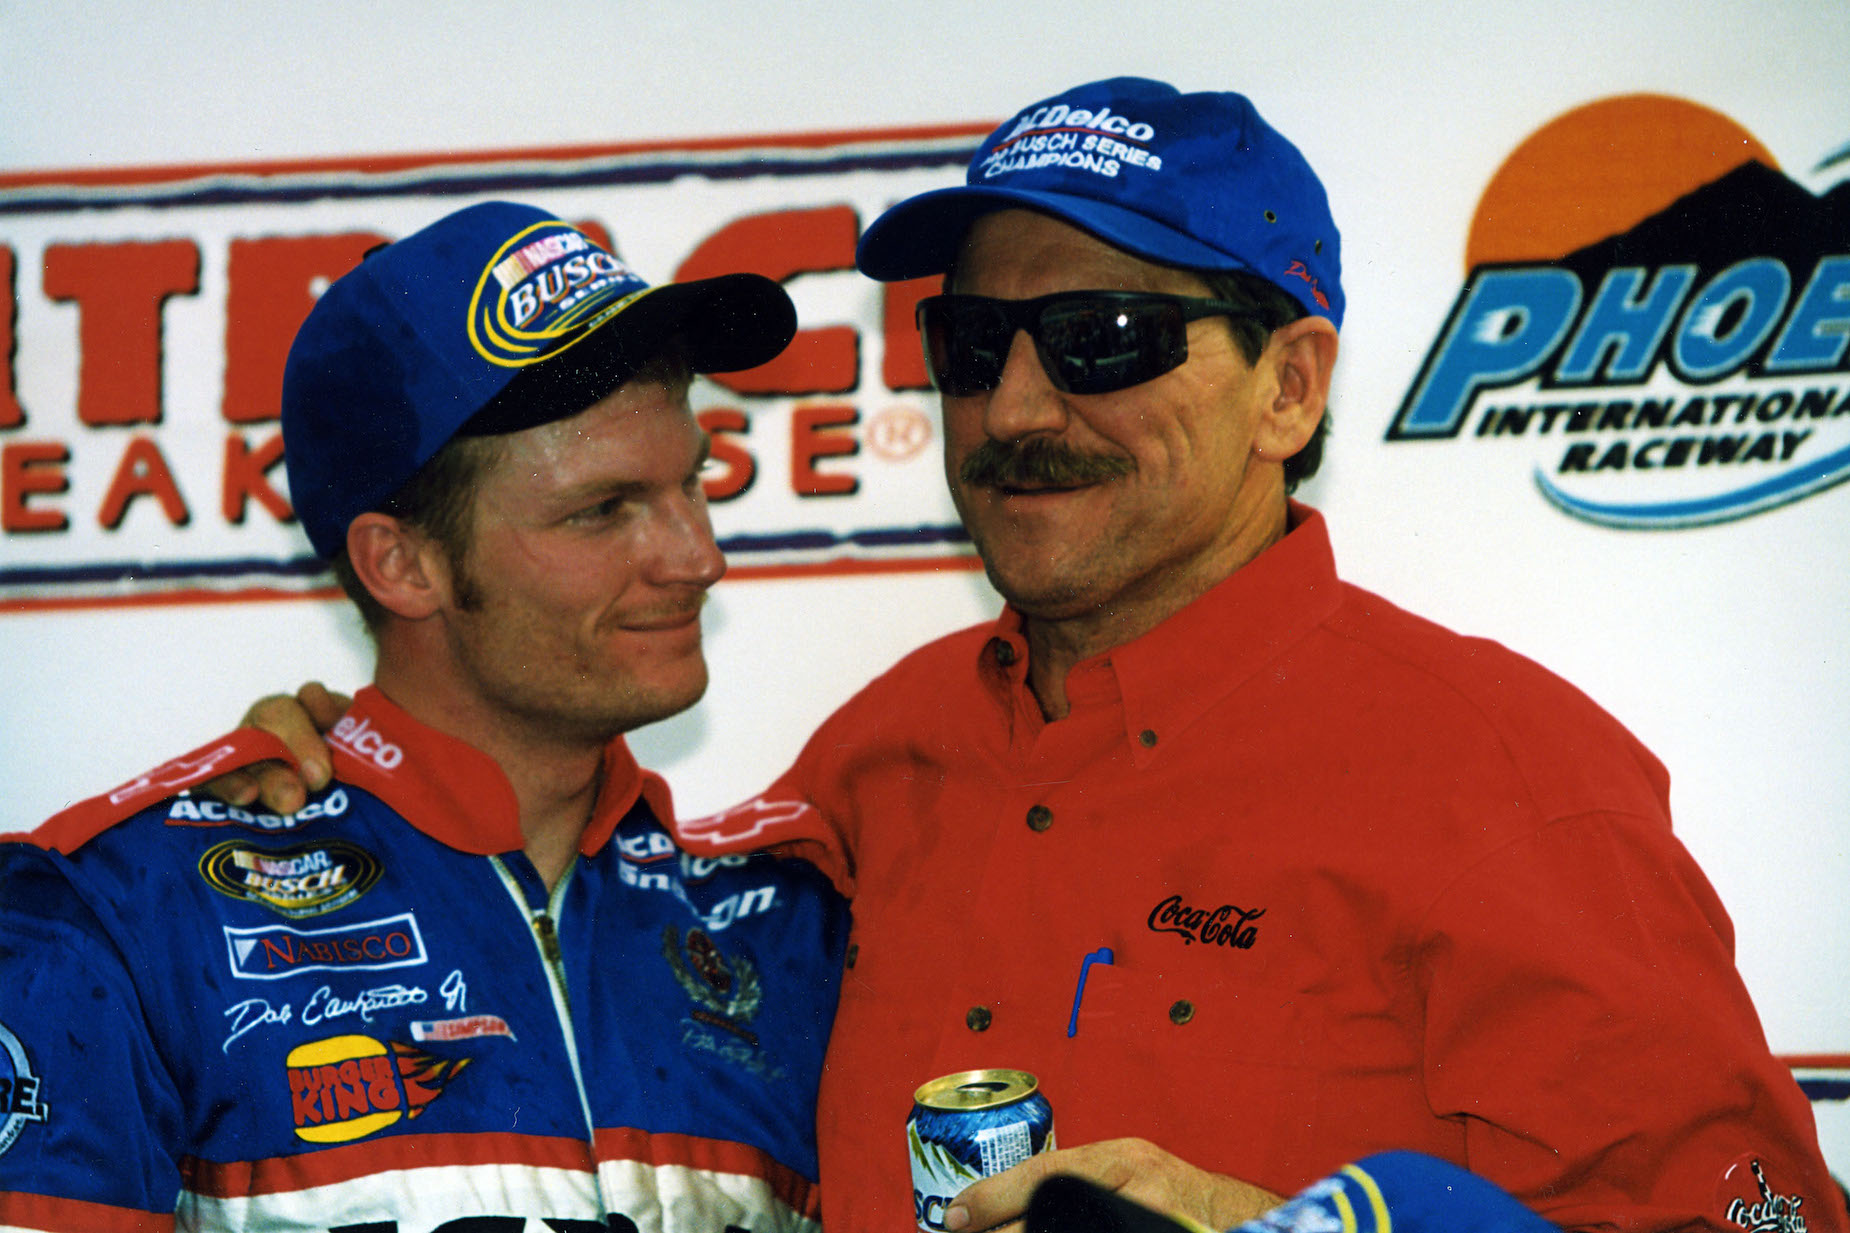 Dale Earnhardt and Dale Earnhardt Jr. celebrate after the younger driver clinched the 1999 NASCAR Grand National title.